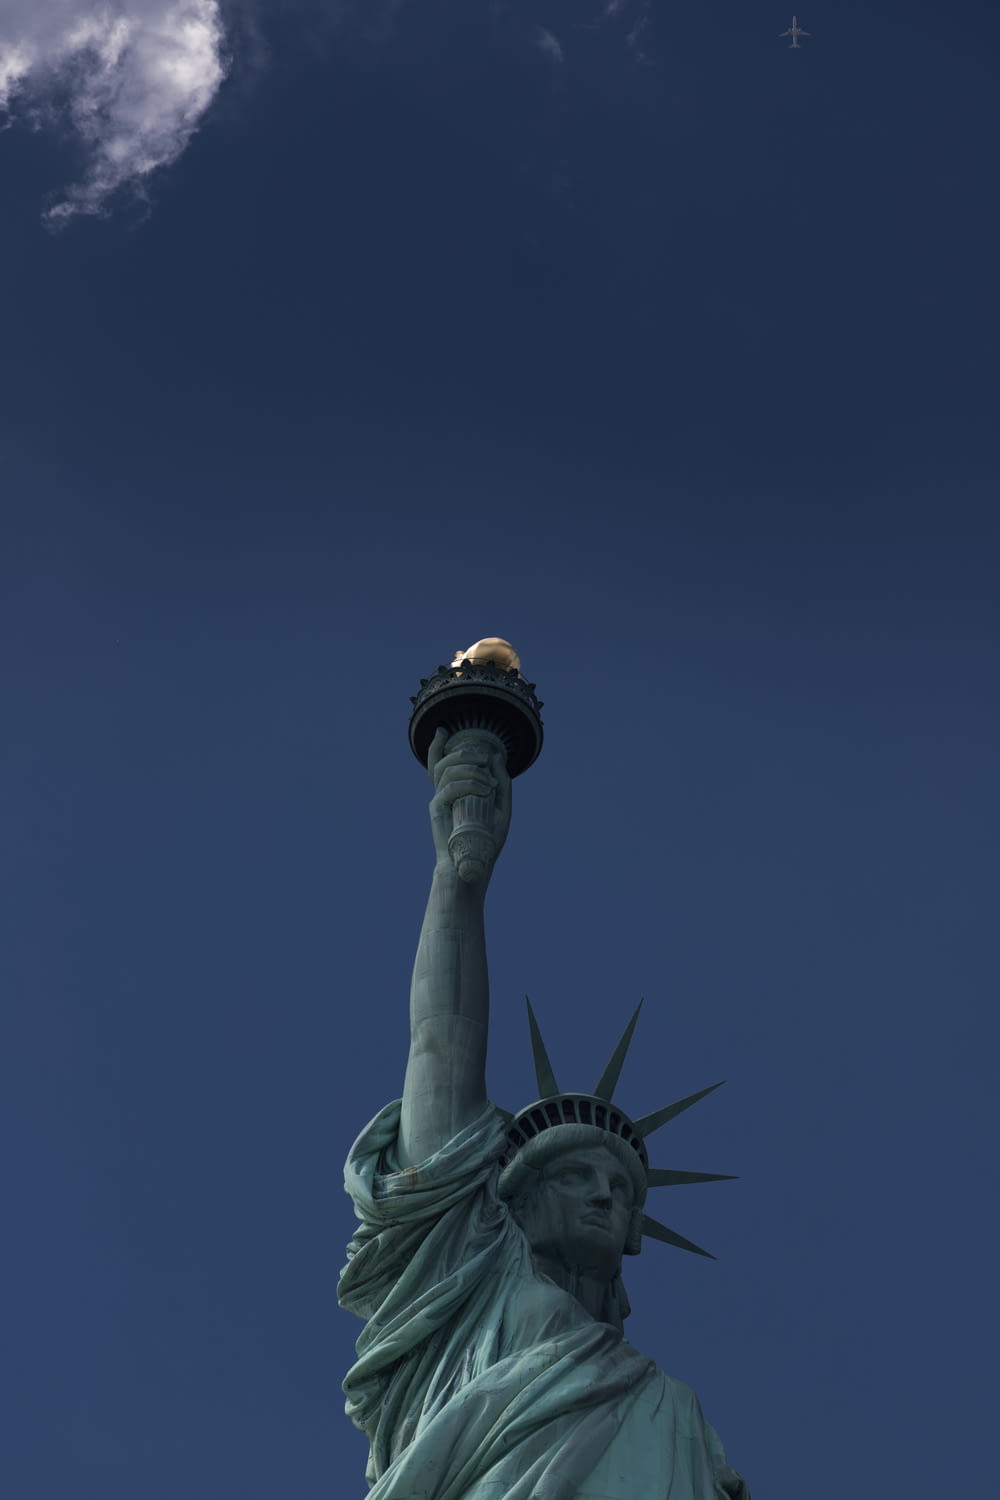 the statue of liberty under a cloudy blue sky